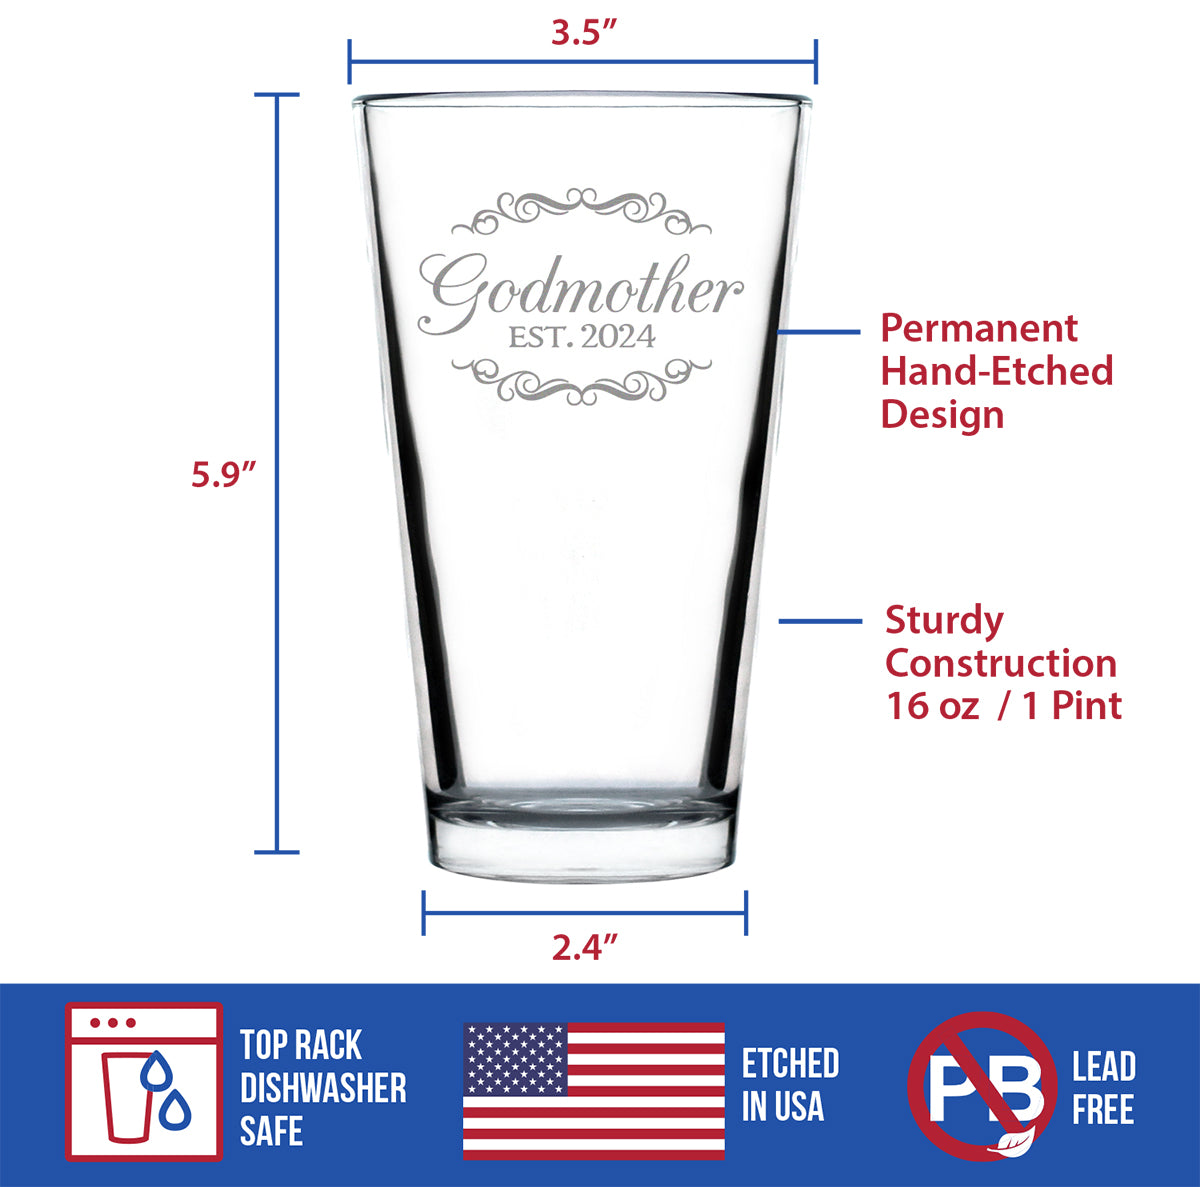 Godmother Est 2024 - New Godmother Pint Glass Proposal Gift for First Time Godparents - Decorative 16 Oz Glasses